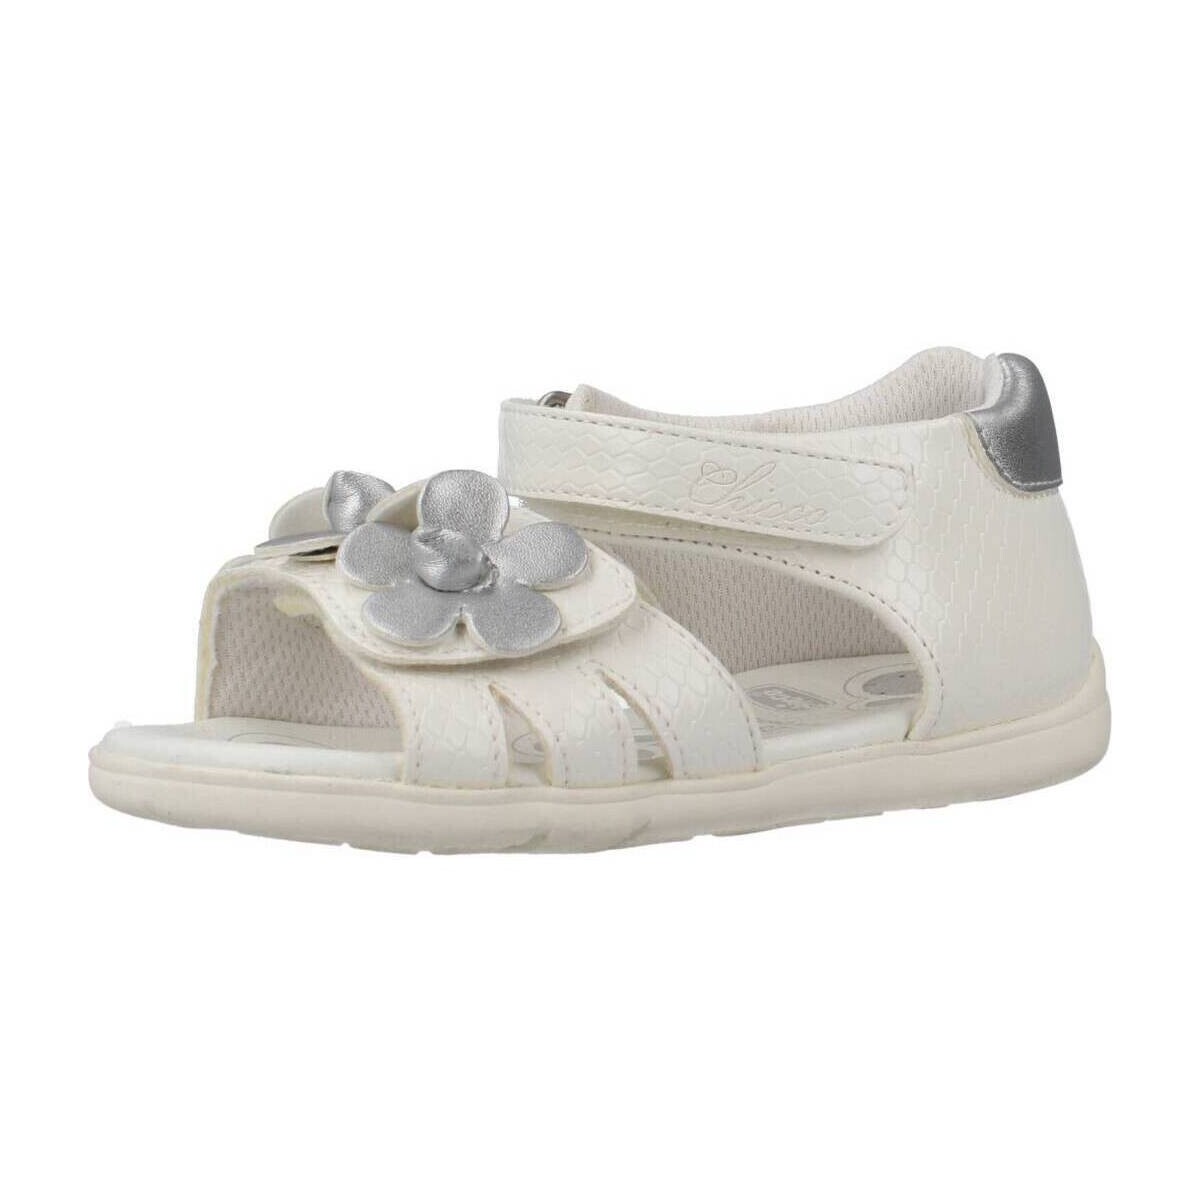 Chaussures Fille Sandales et Nu-pieds Chicco GENOVEFFA Blanc